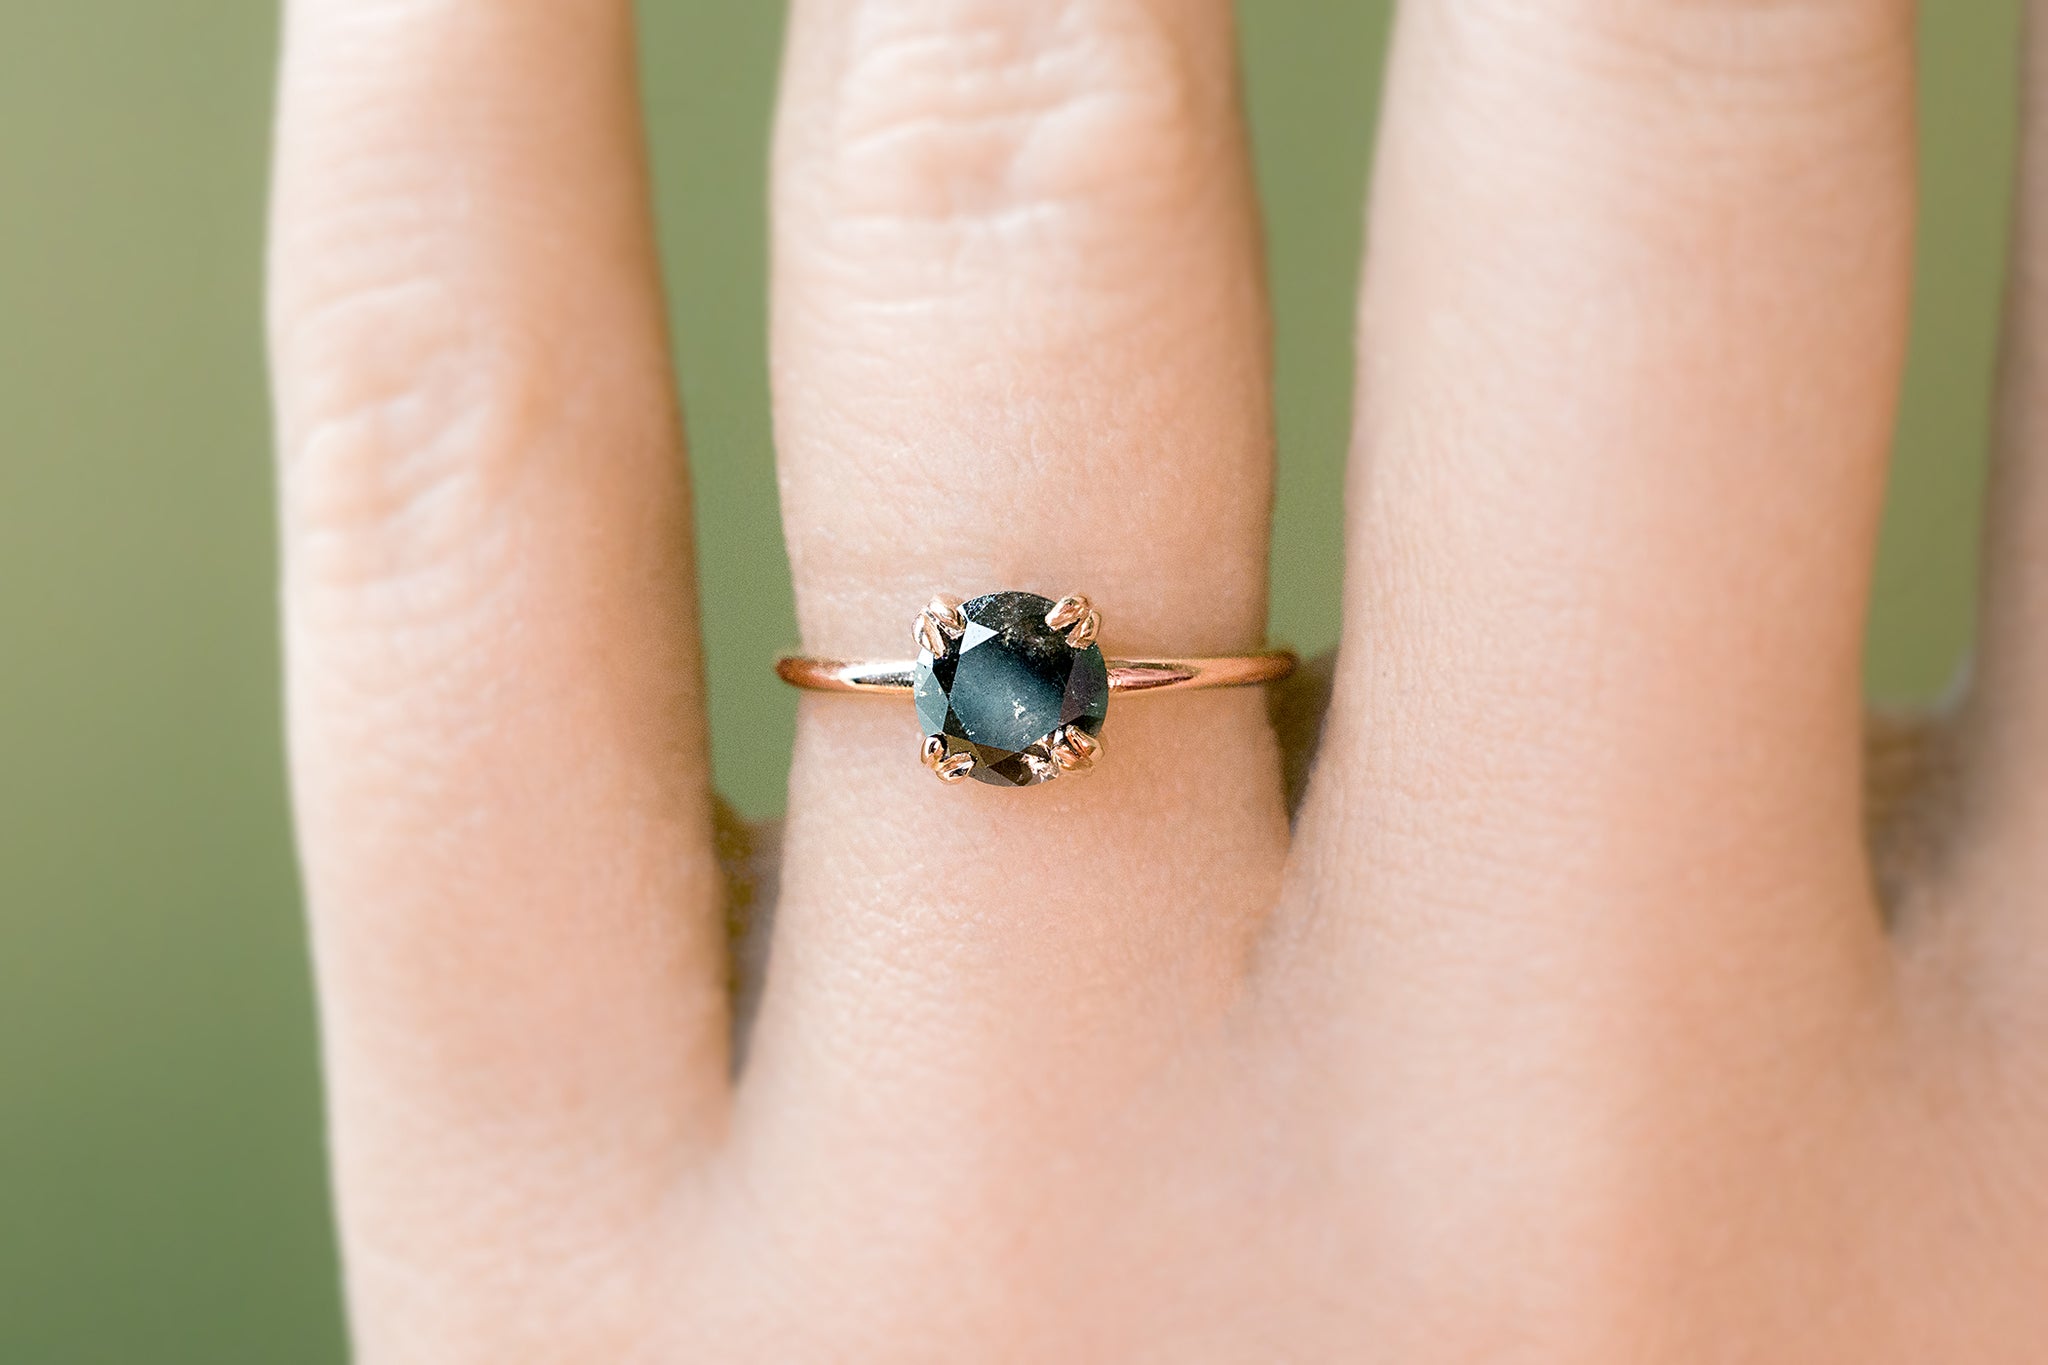 Black Diamond Recycled Rose Gold Dunne Ring - S. Kind & Co